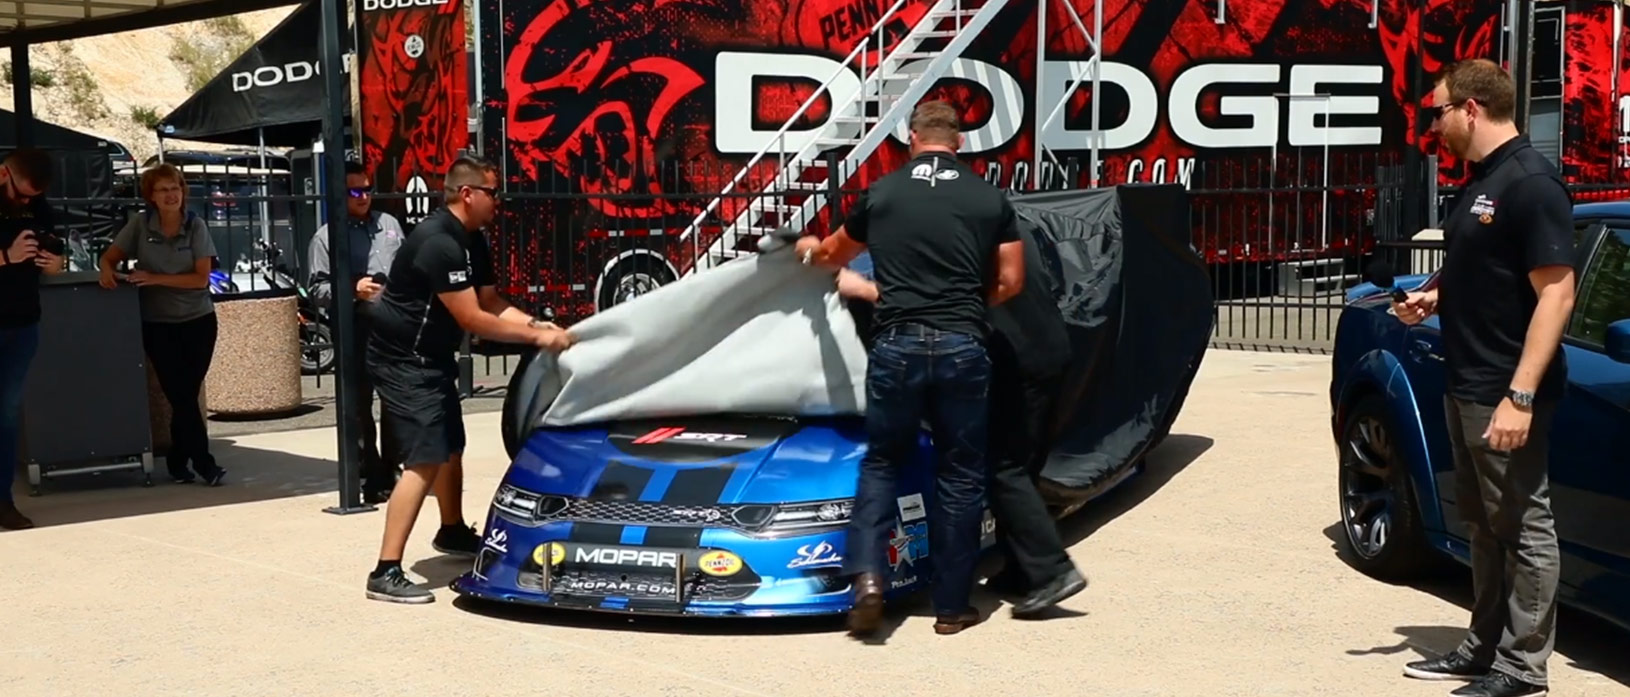 Check Out The Reveal of Matt Hagan’s New Funny Car